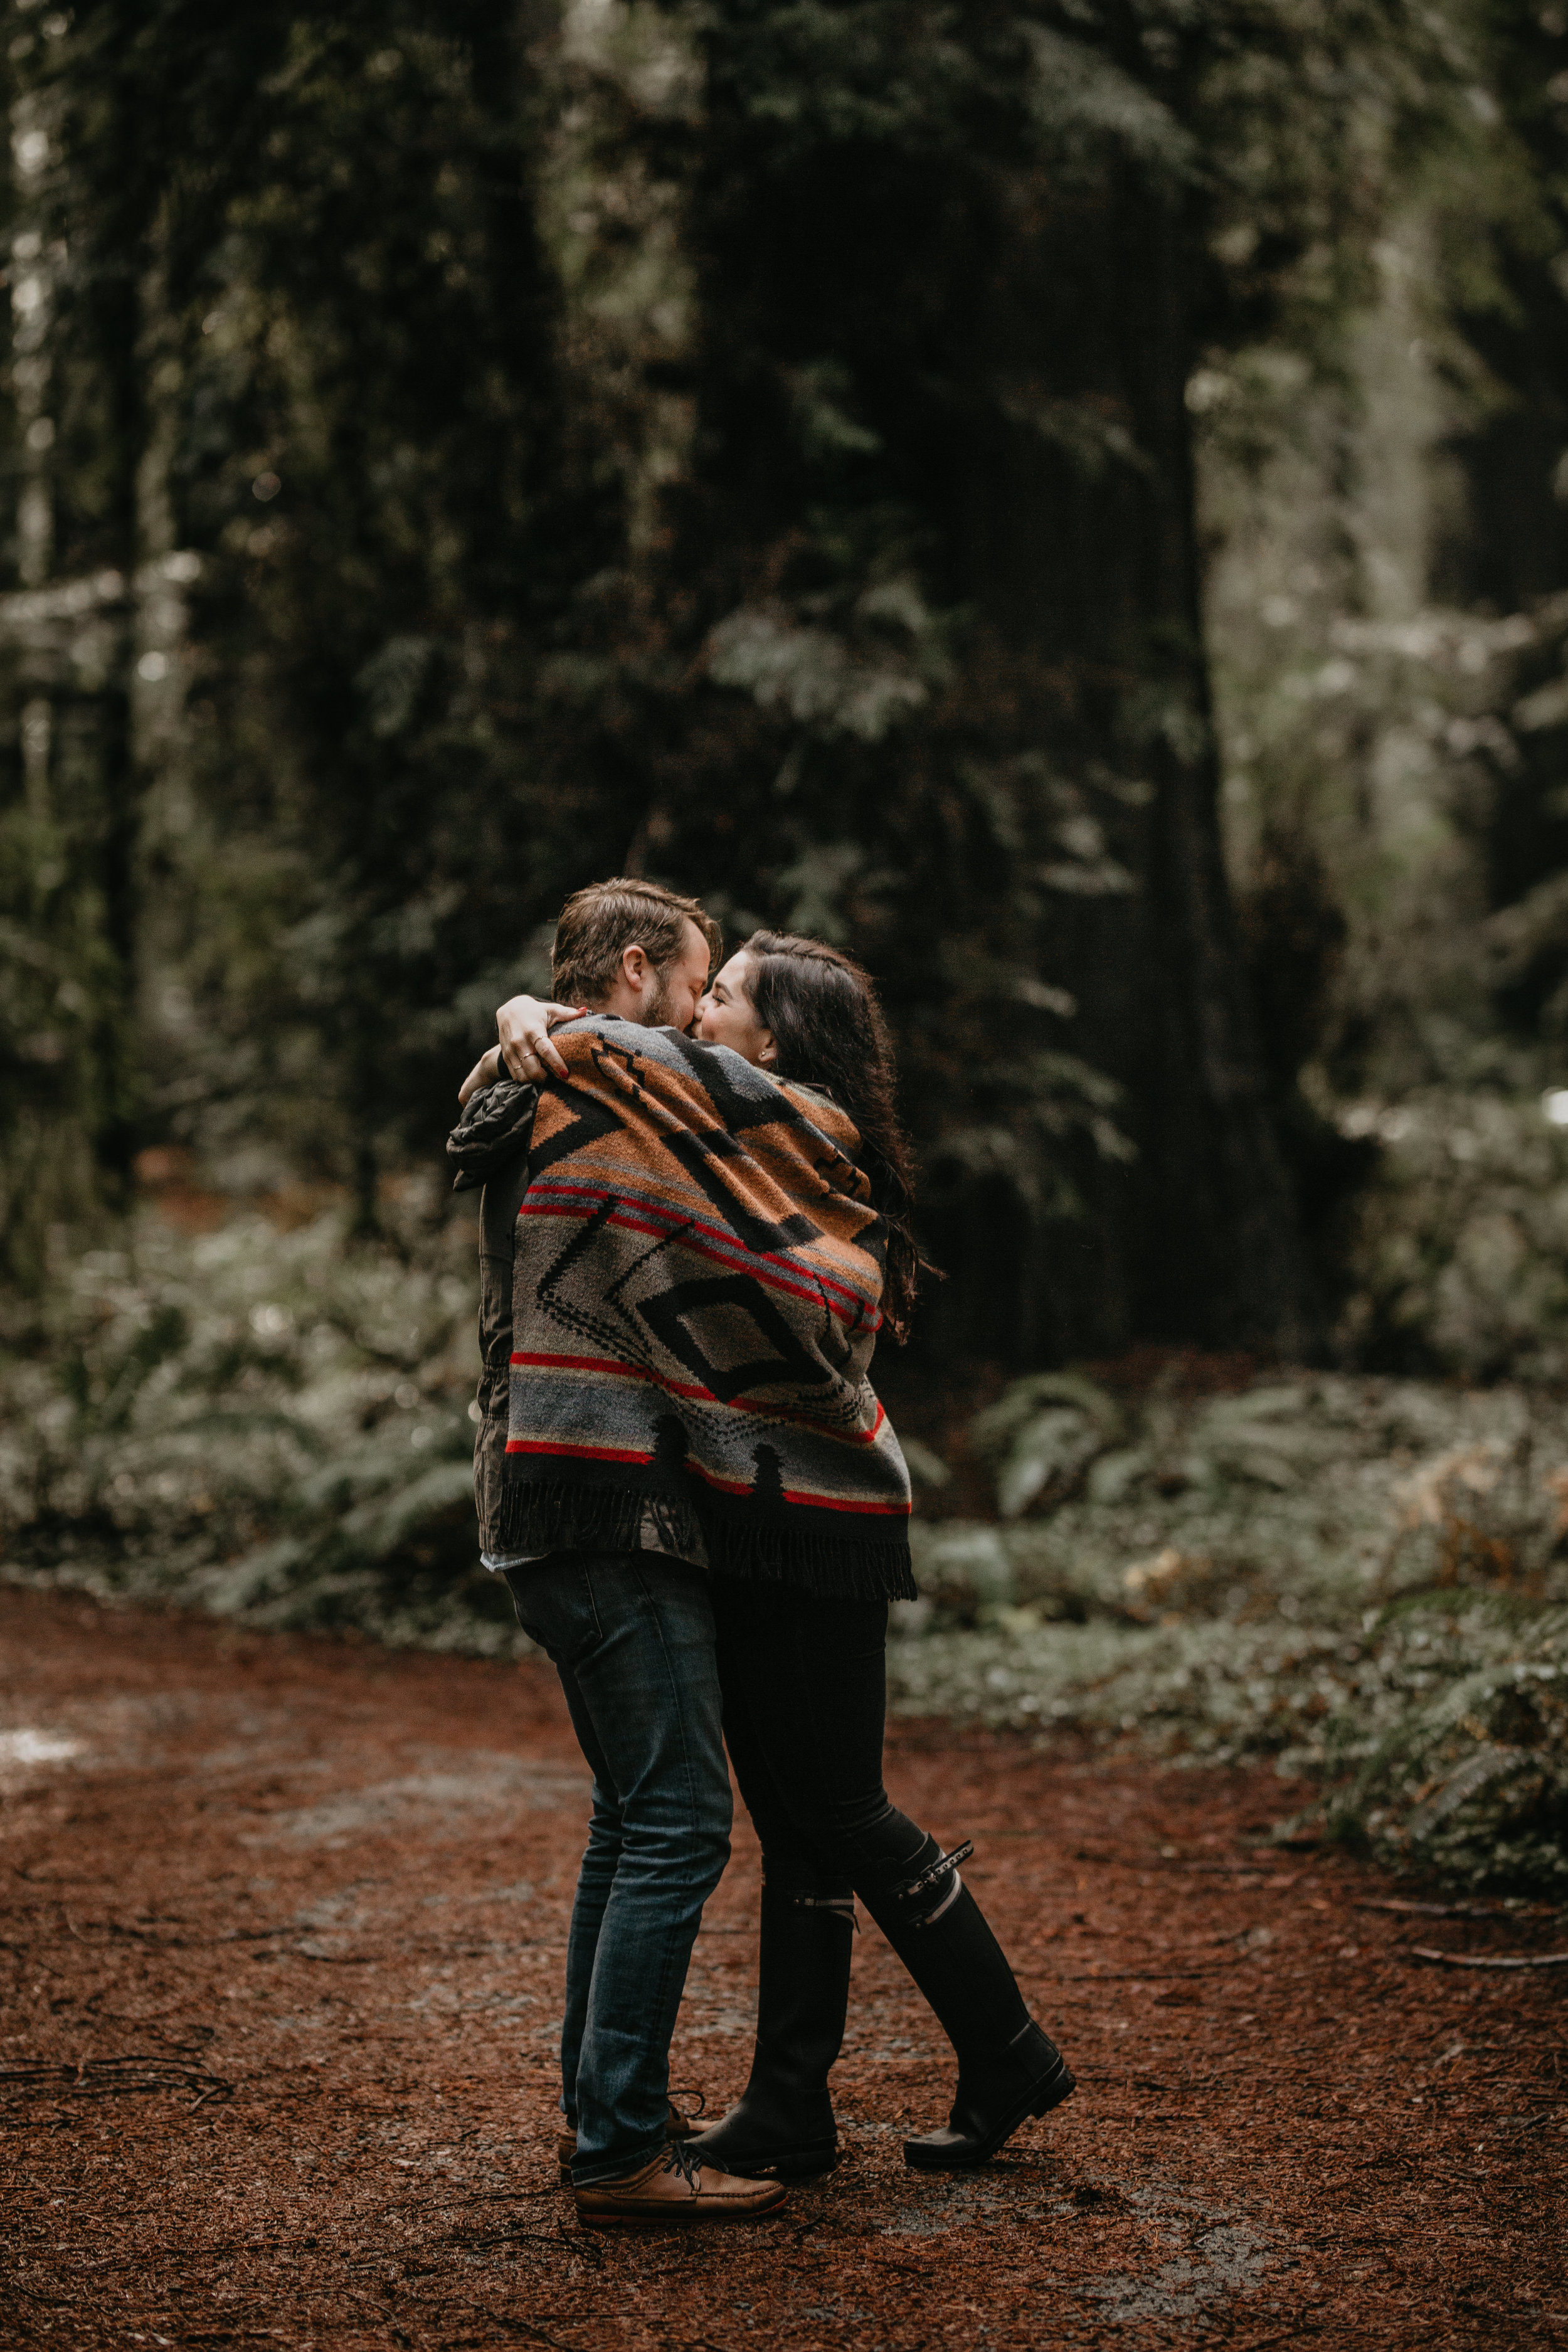 nicole-daacke-photography-redwoods-national-park-forest-rainy-foggy-adventure-engagement-session-humboldt-county-old-growth-redwood-tree-elopement-intimate-wedding-photographer-14.jpg